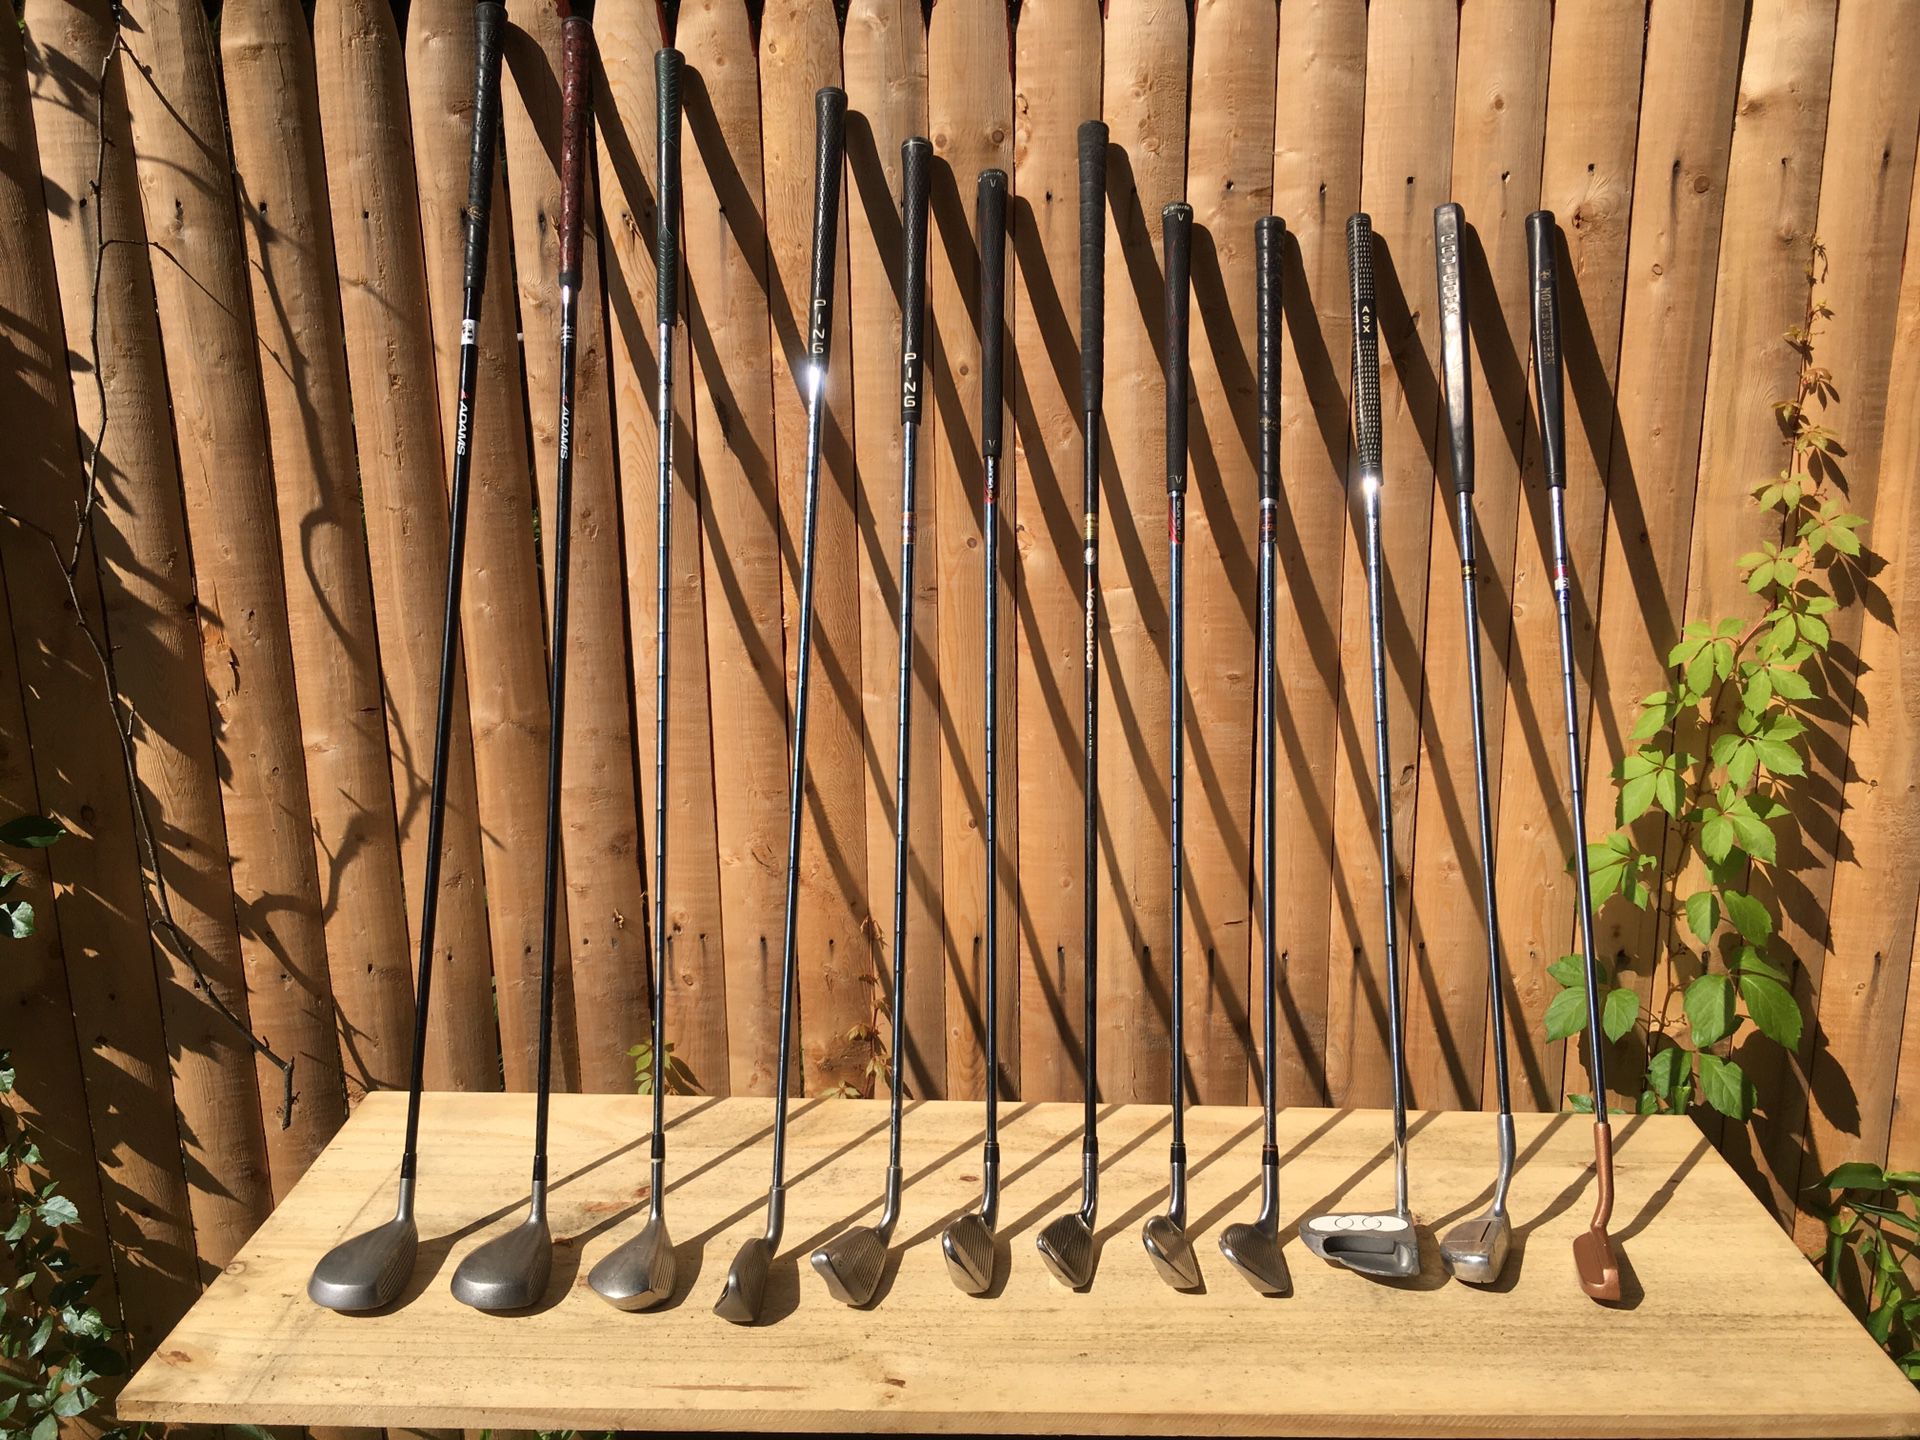 Golf clubs And equipment